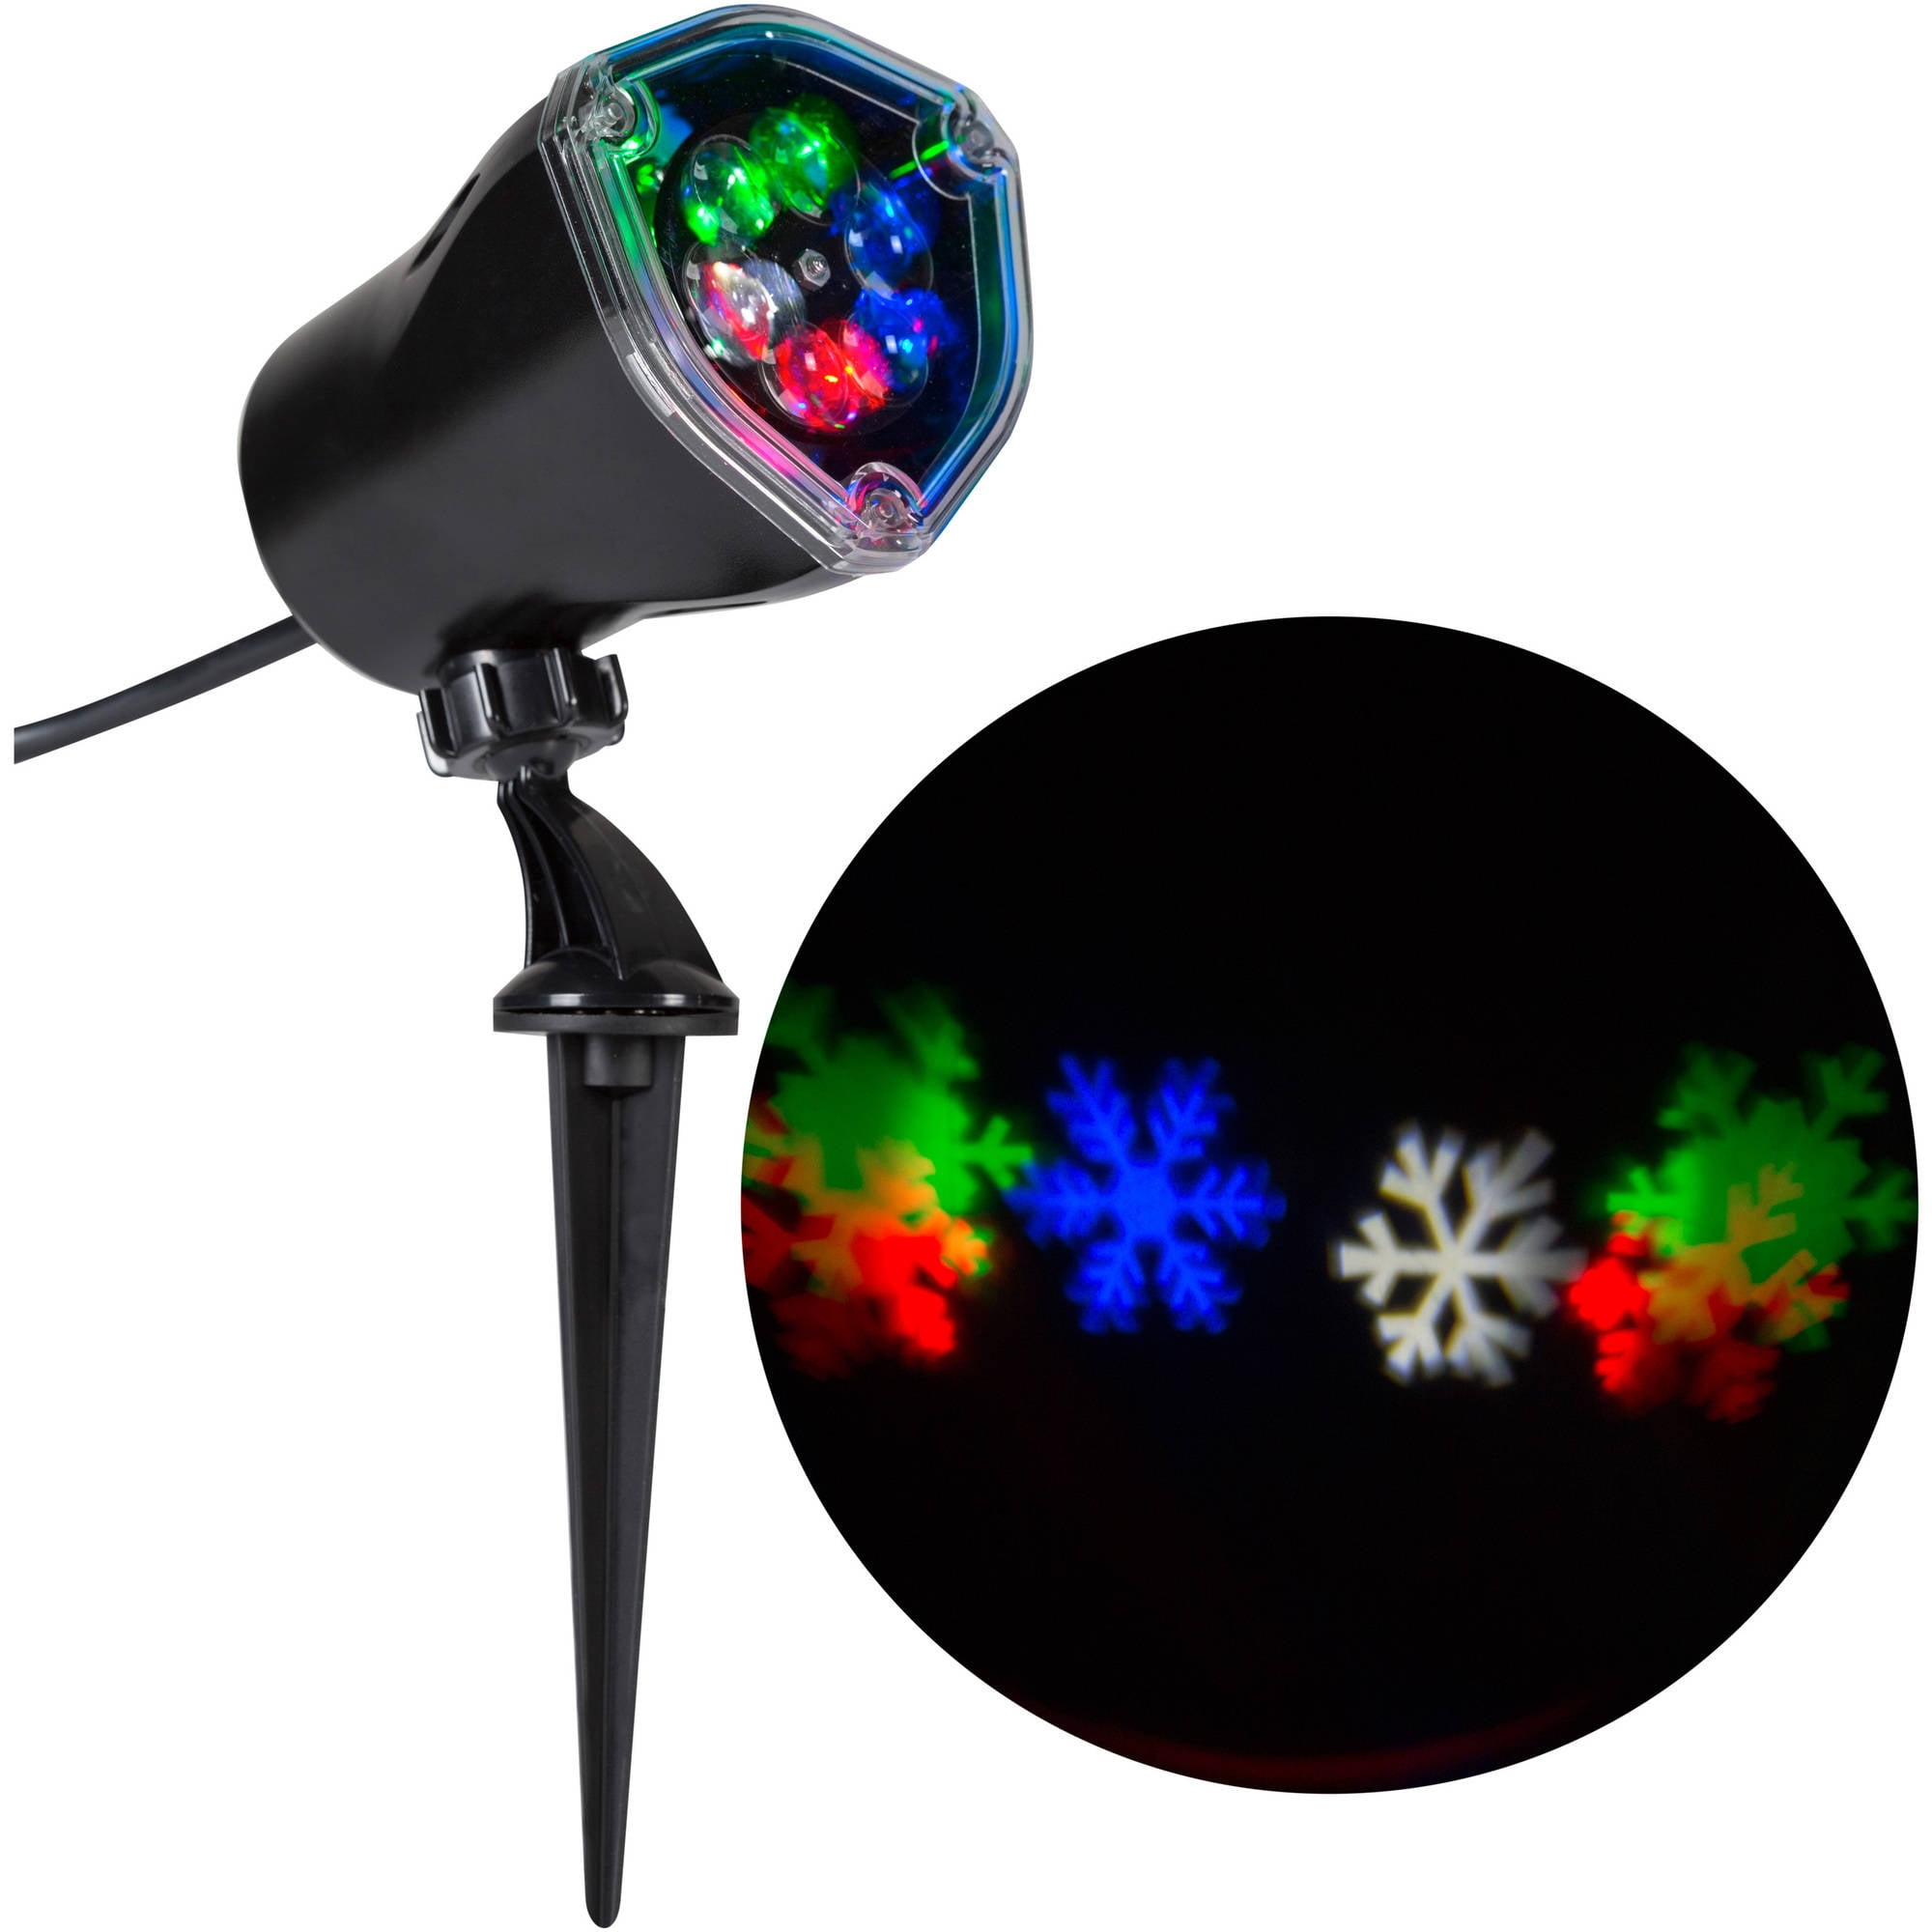 Gemmy APPLights LED SnowFlurry Multi-Color 61-Programs Projection Stake 